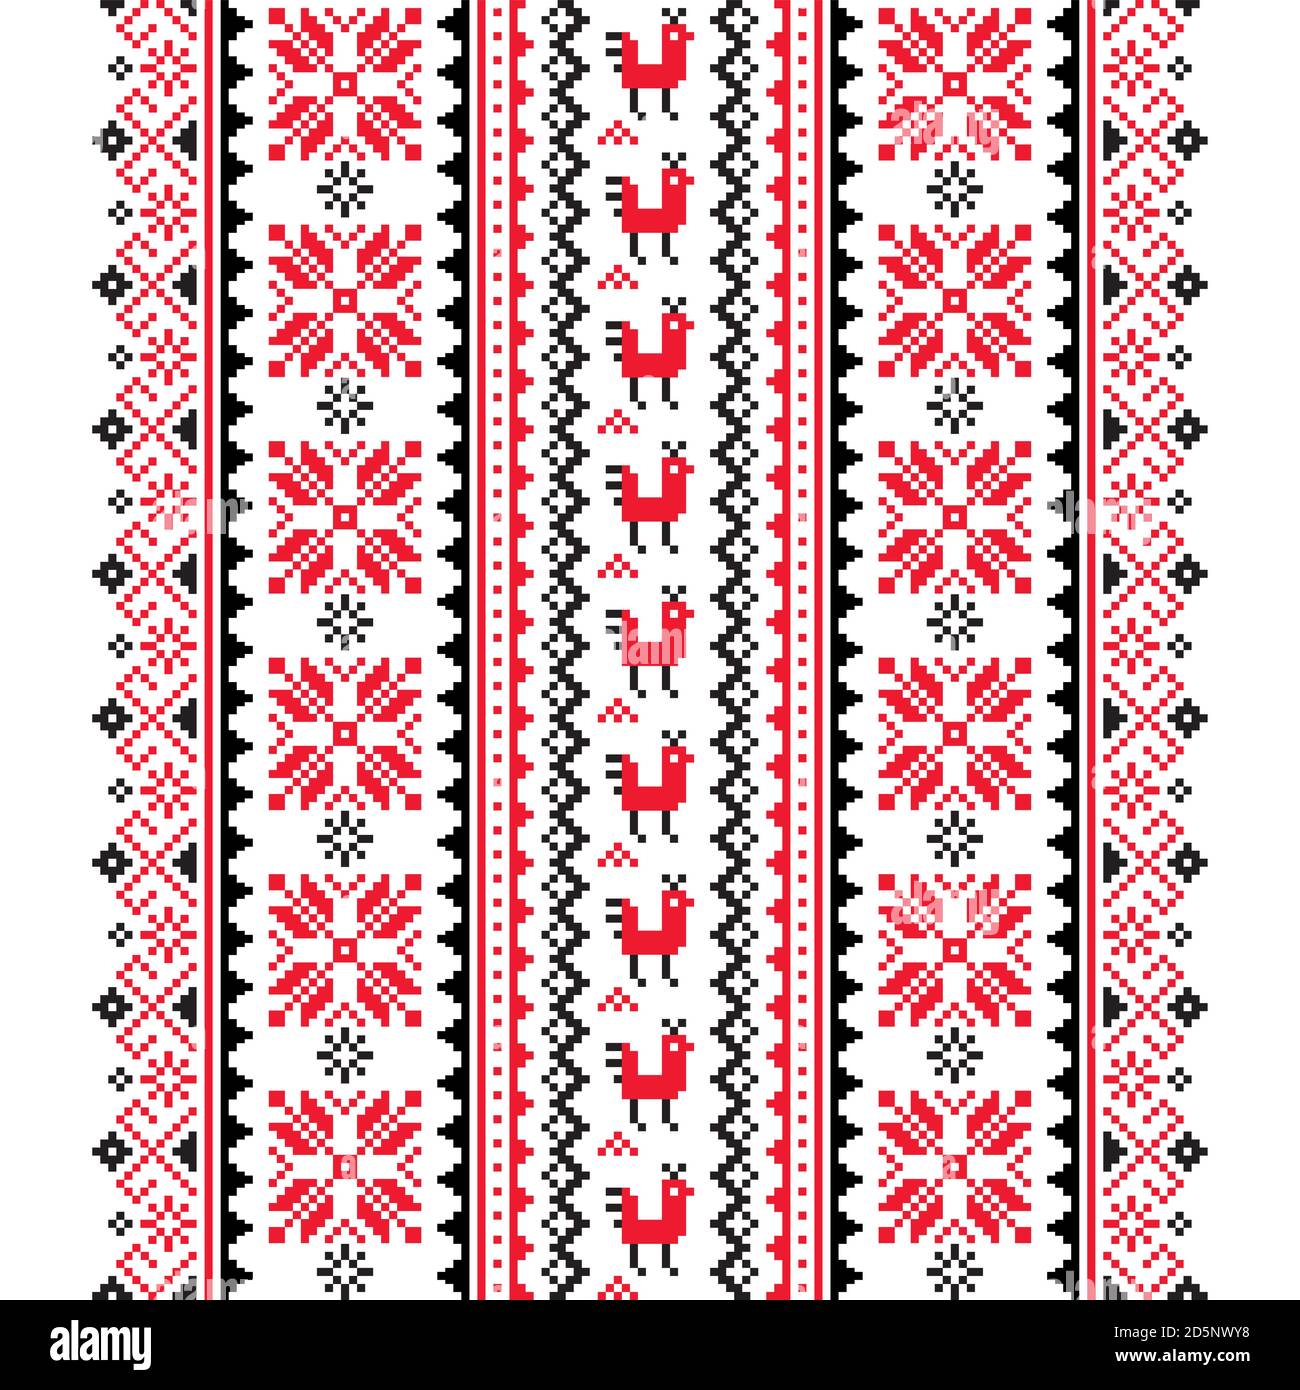 Ukrainian, Belarusian folk art vector seamless pattern in red and black, inspired by traditional cross-stitch design Vyshyvanka Stock Vector